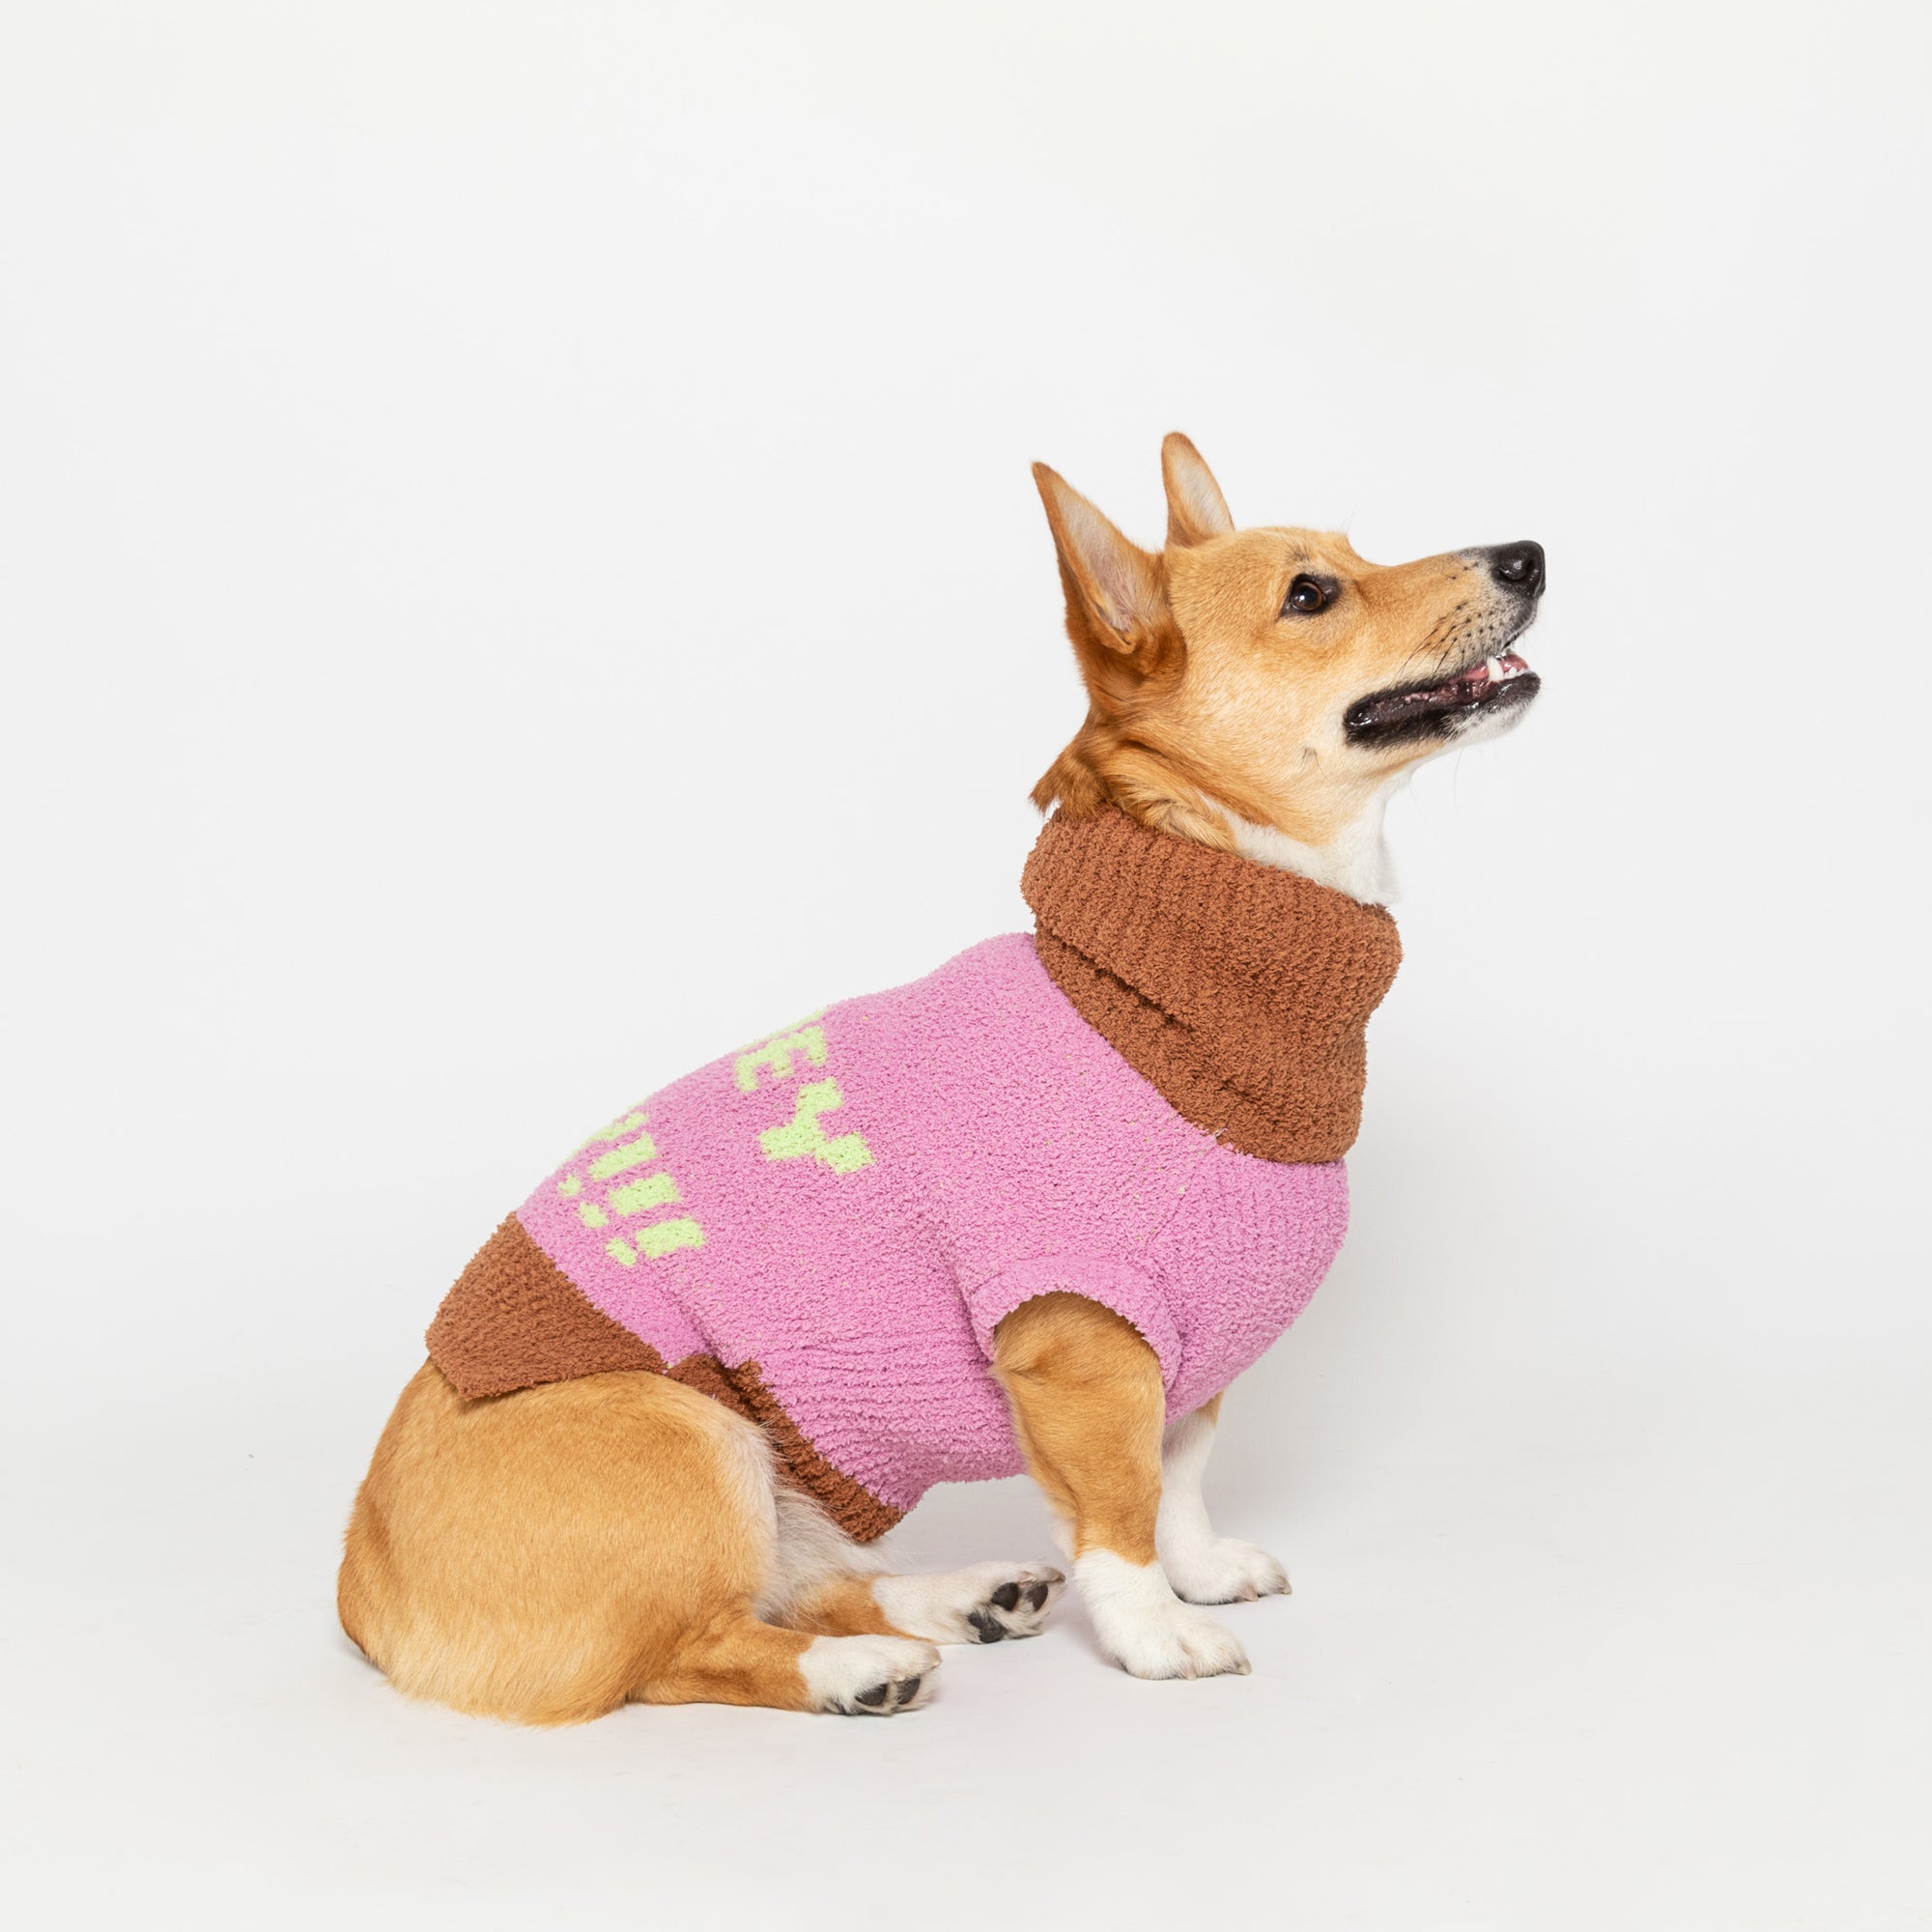  Corgi in a pink "The Furryfolks" Hey sweater looks upward, sitting against a white background.